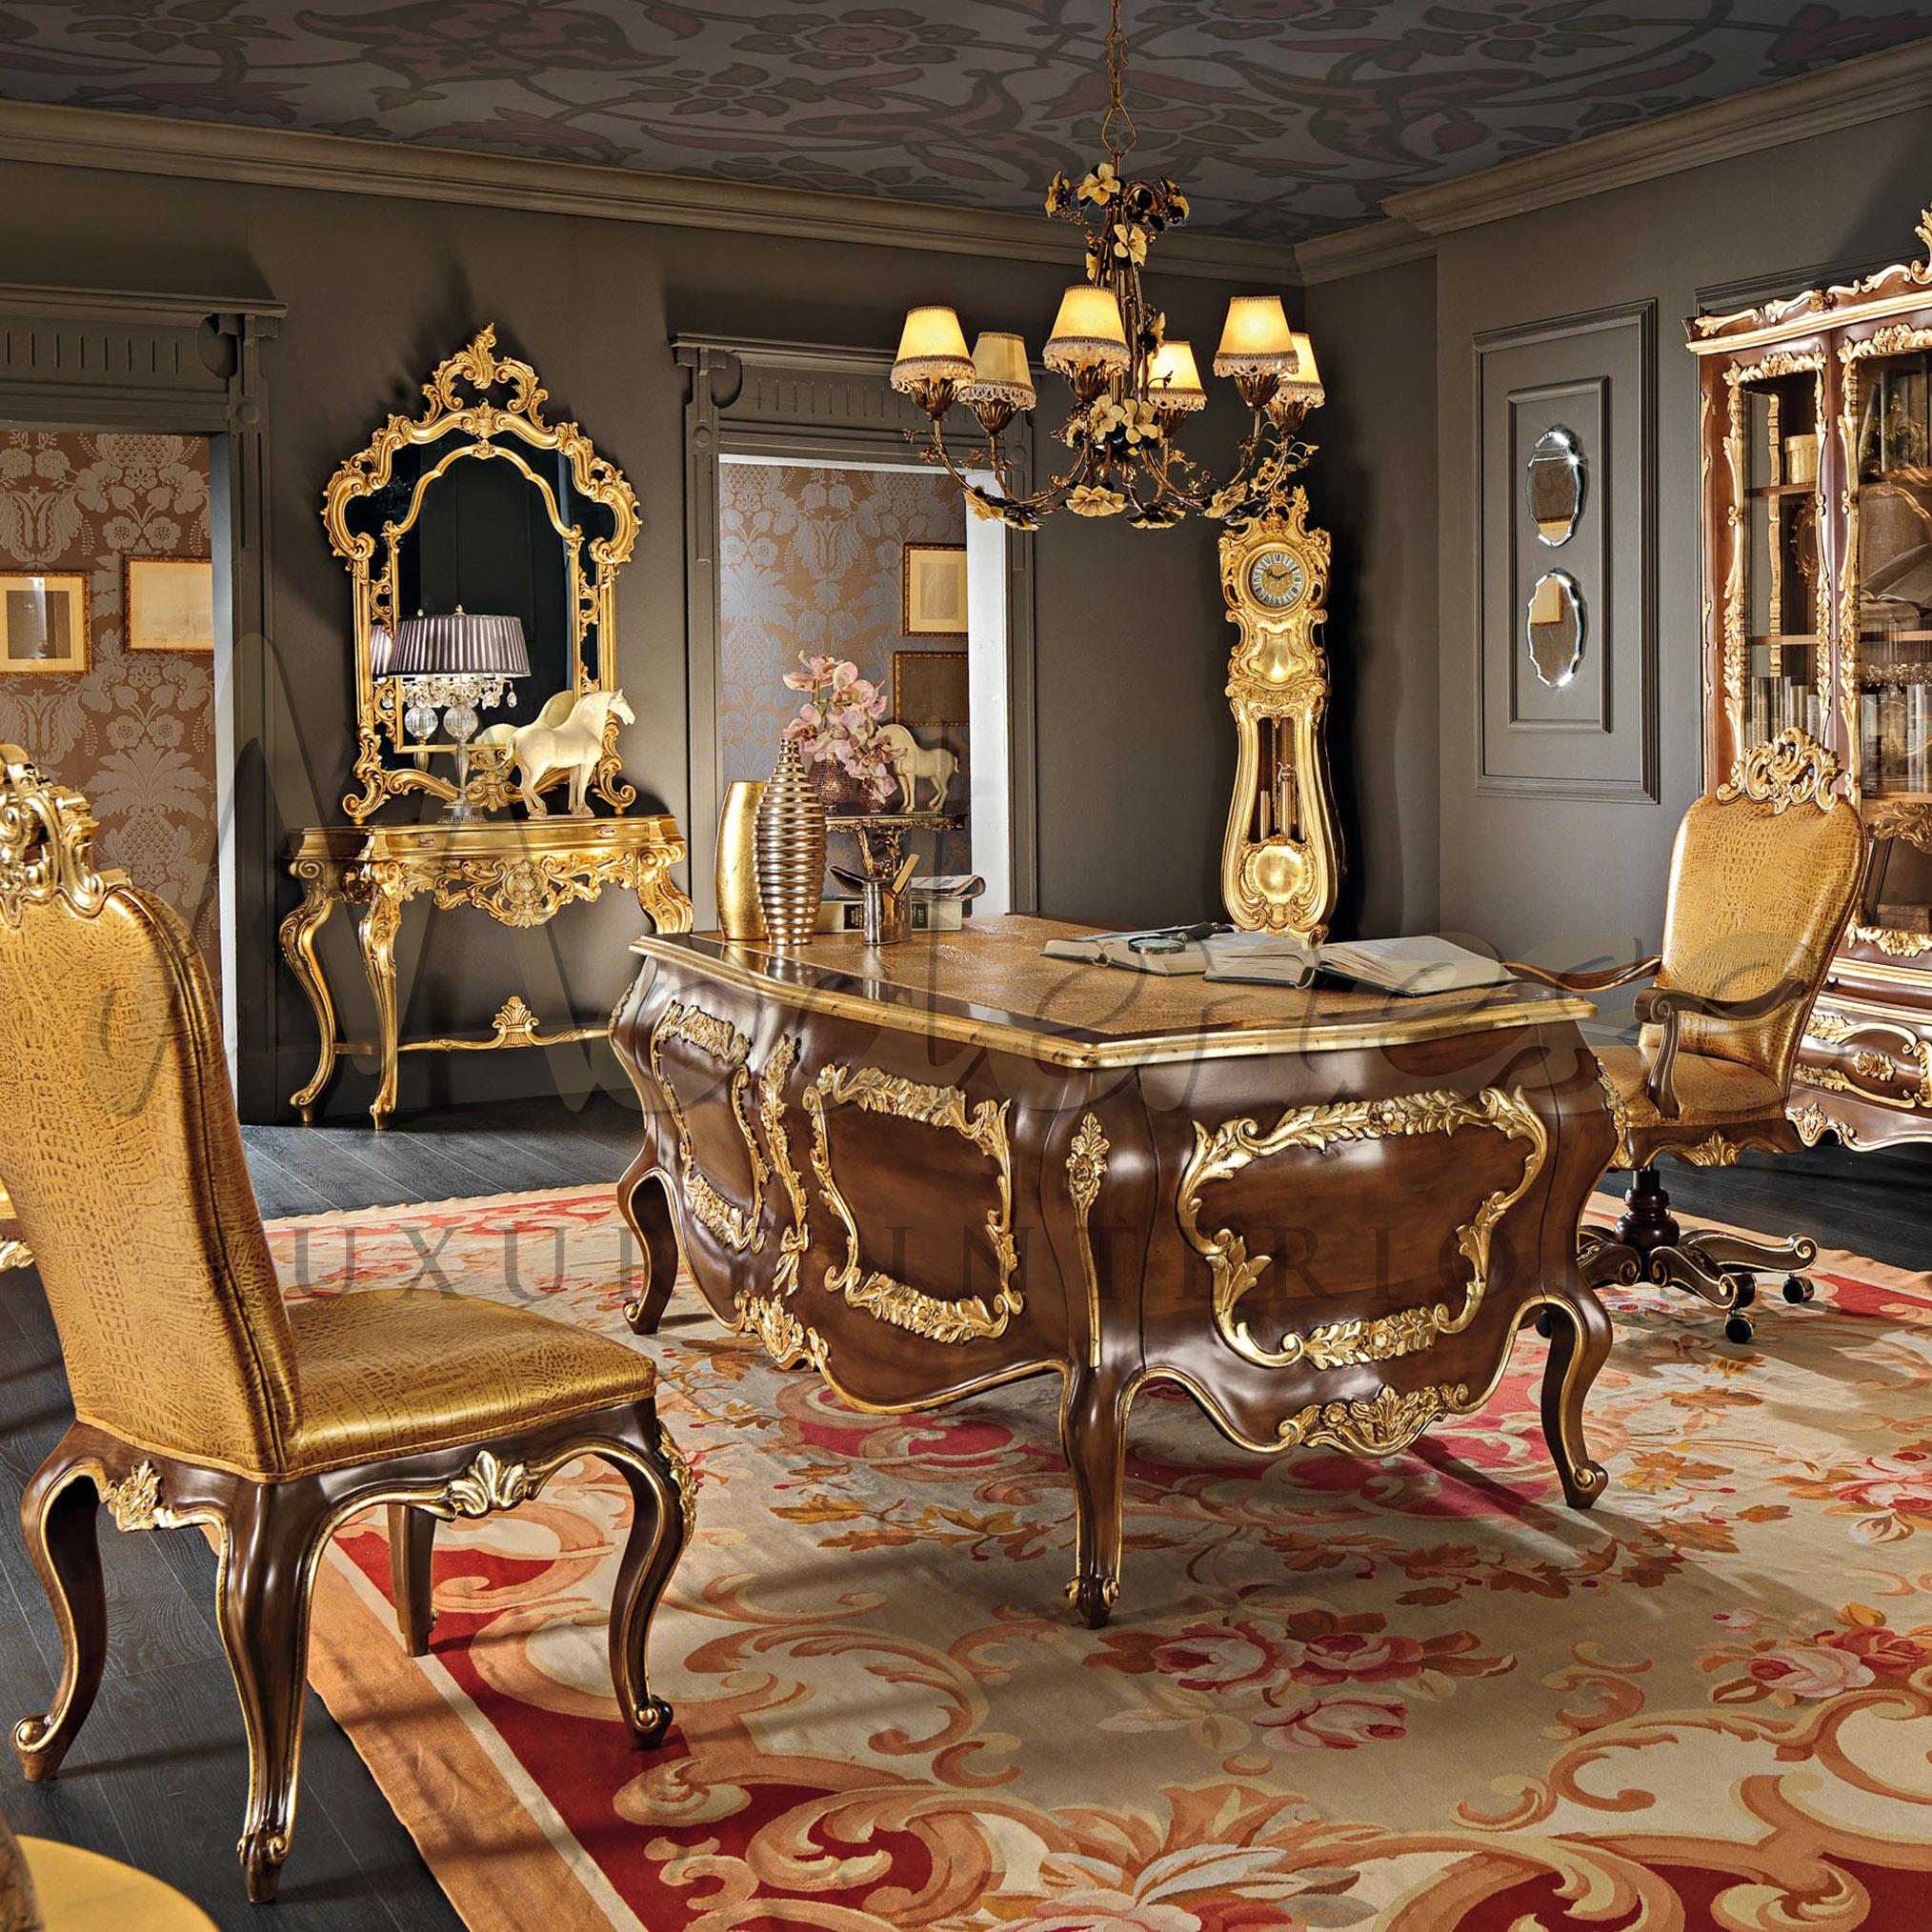 Admire this figured presidential office desk finely finished in ebanon and gold leaf decorated carvings. Its curved baroque legs really make a statement, and the real italian leather on the upper surface is perfect when paired with the office